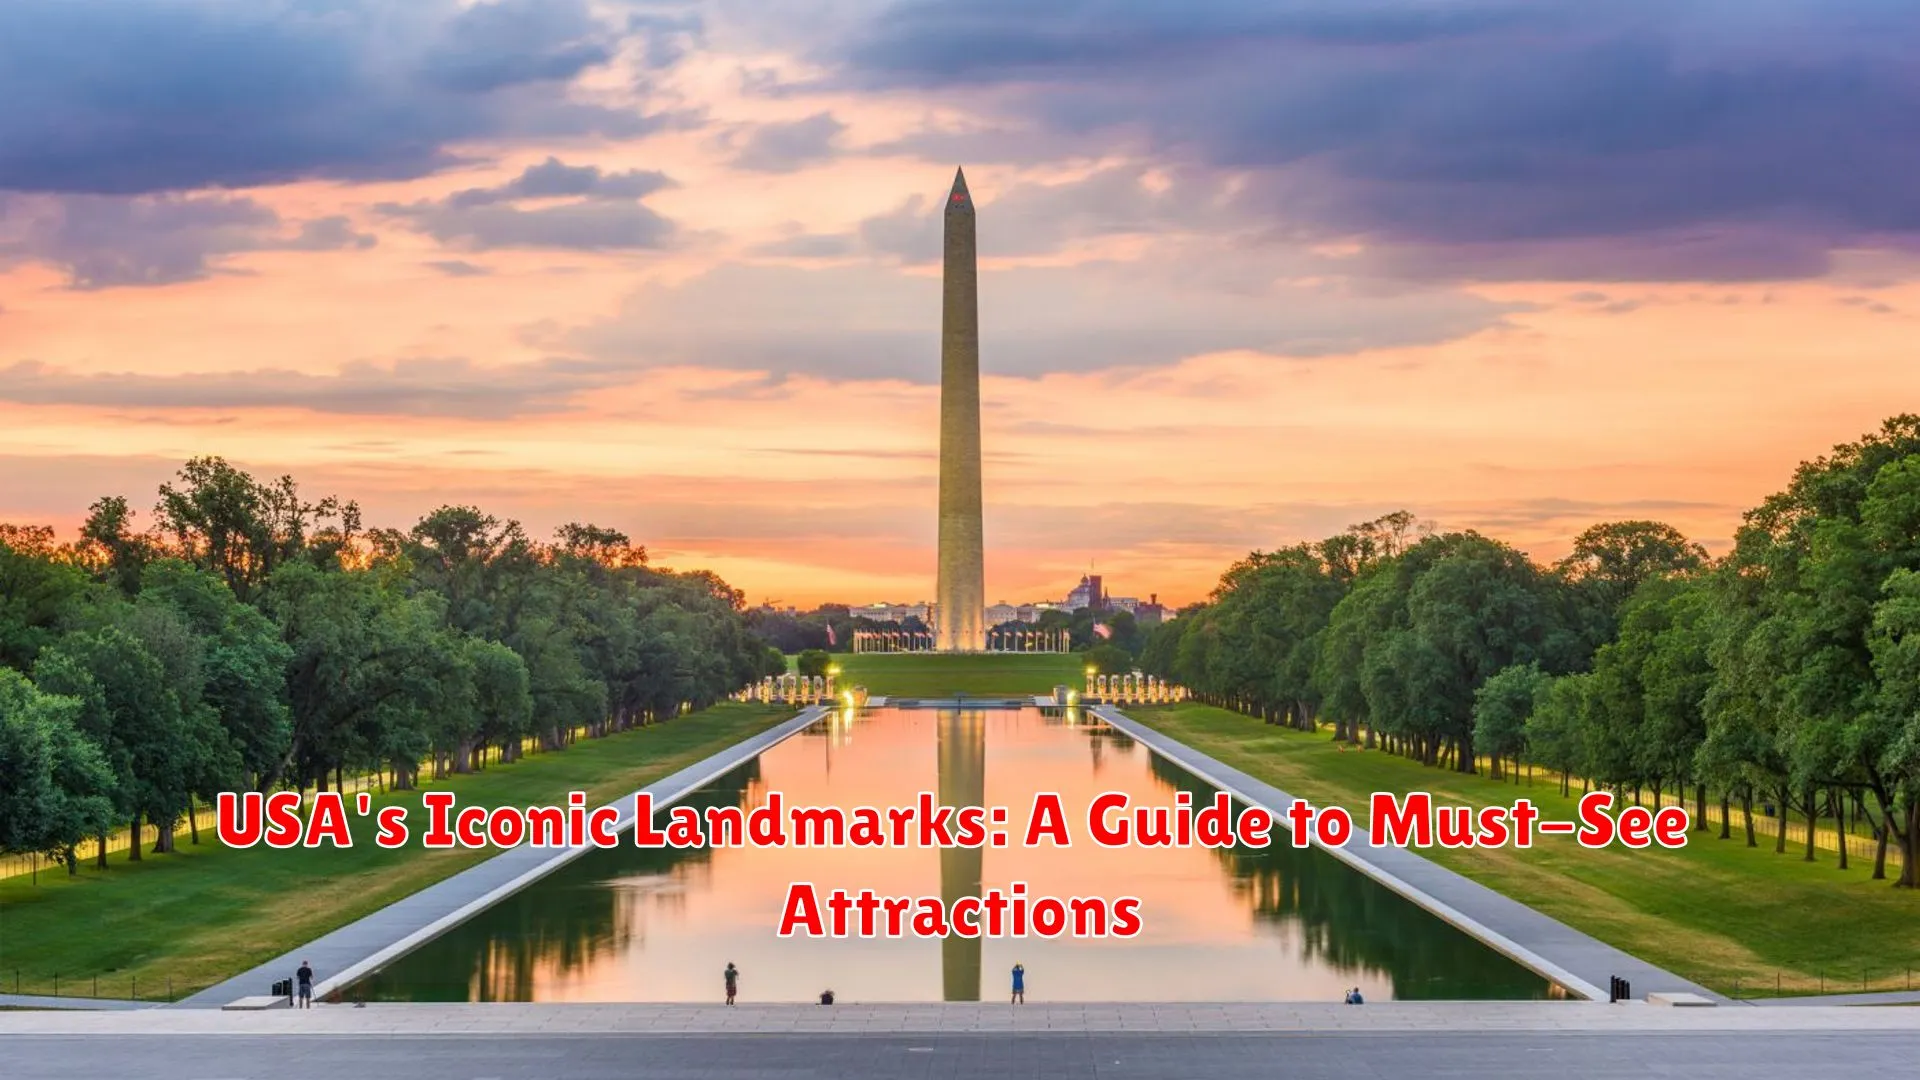 USA's Iconic Landmarks: A Guide to Must-See Attractions